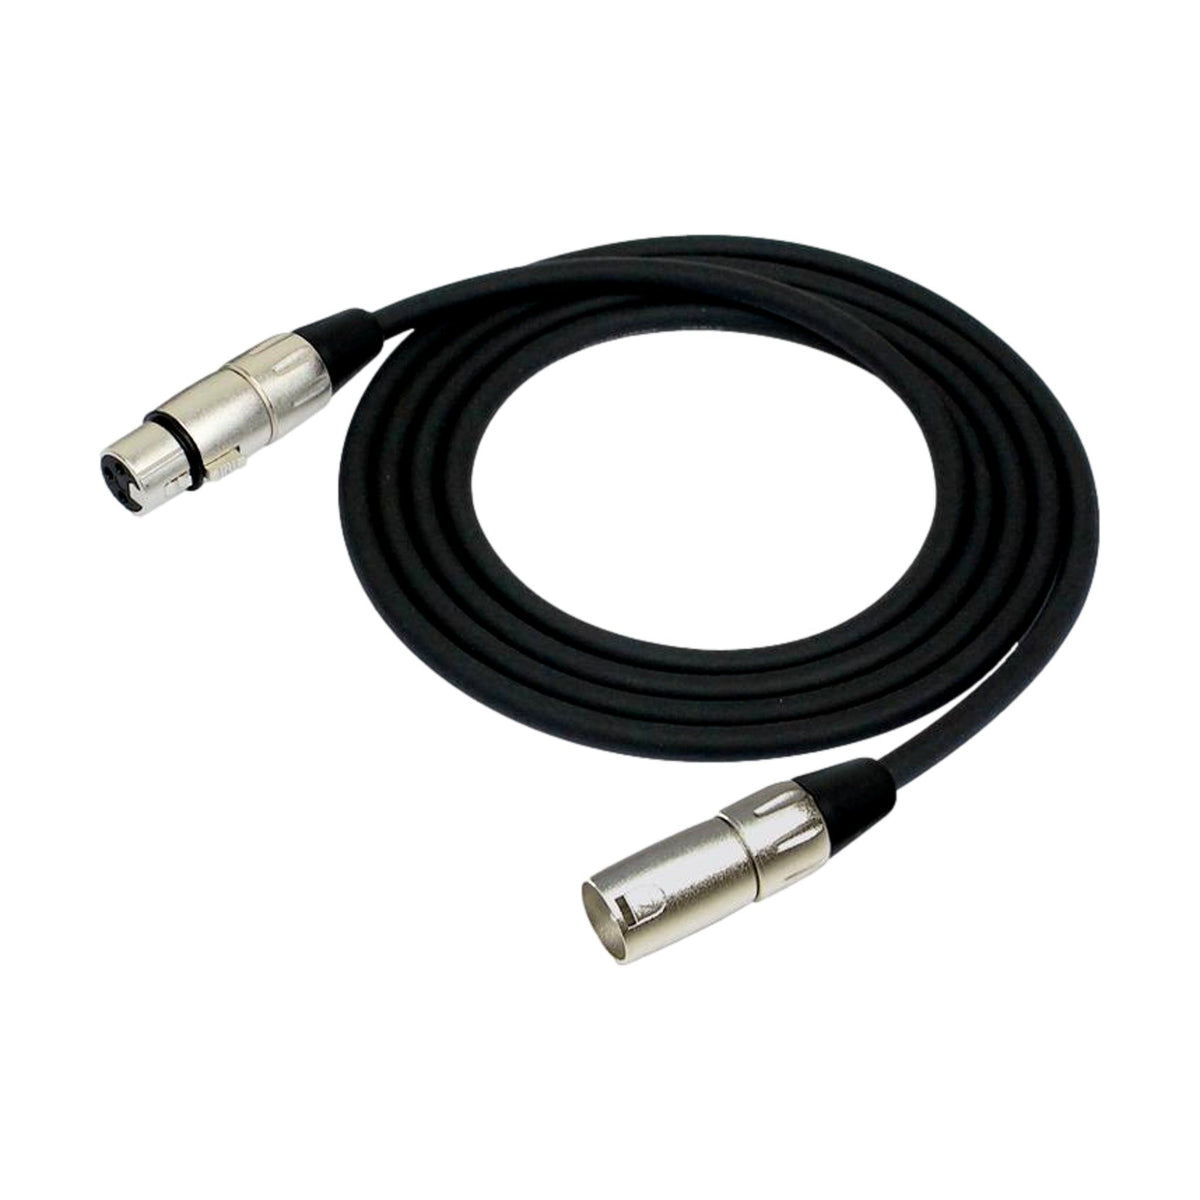 Kirlin 10ft Microphone Cable Black